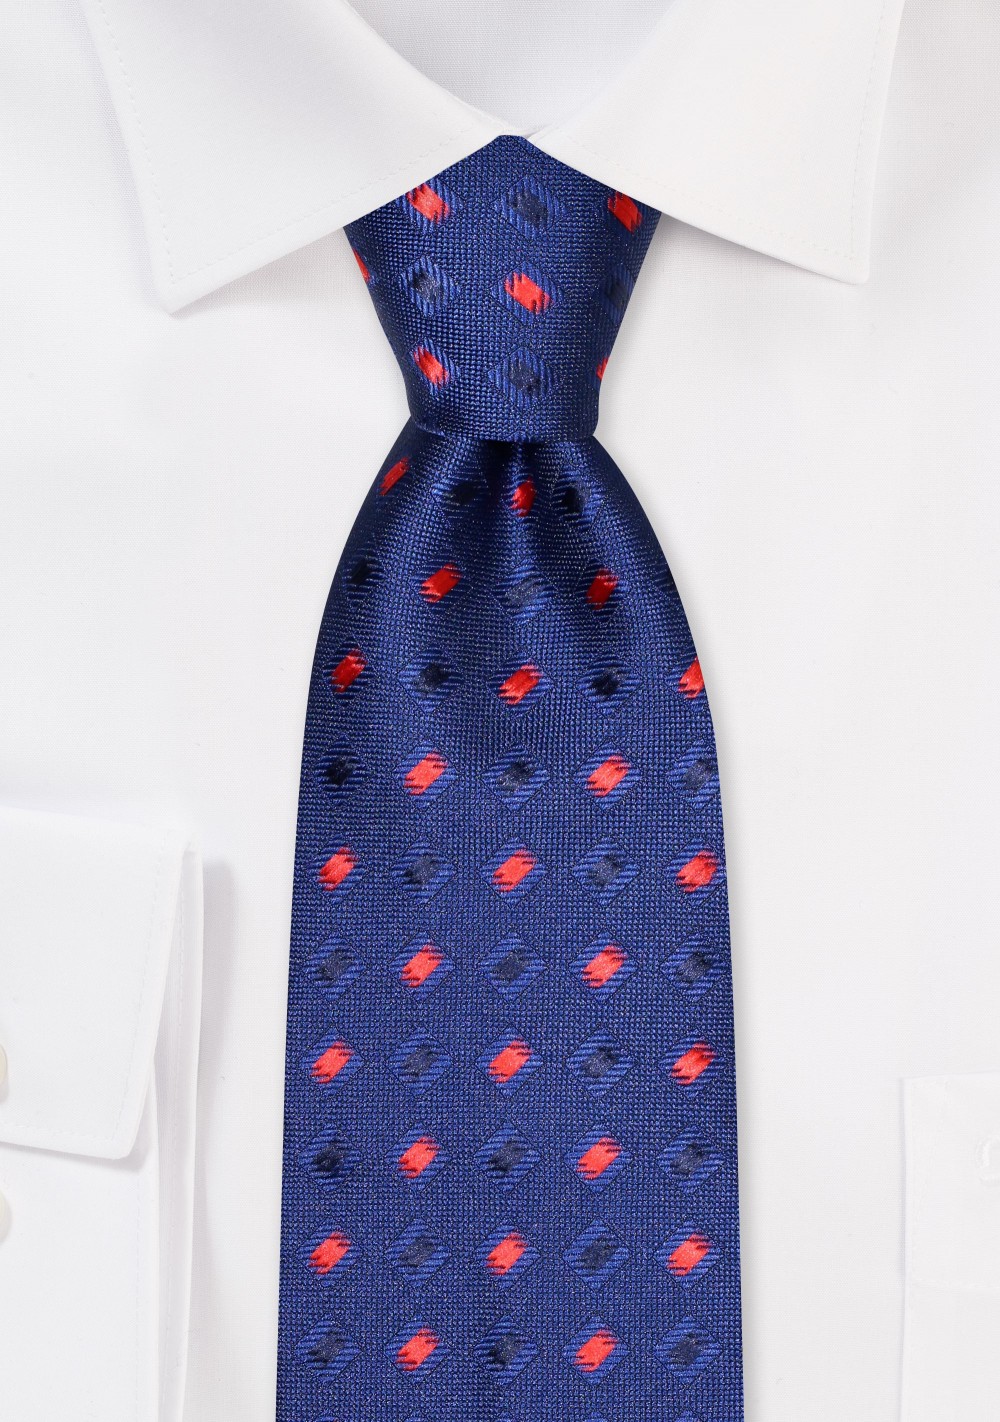 Royal Blue Tie with Navy and Coral Checks